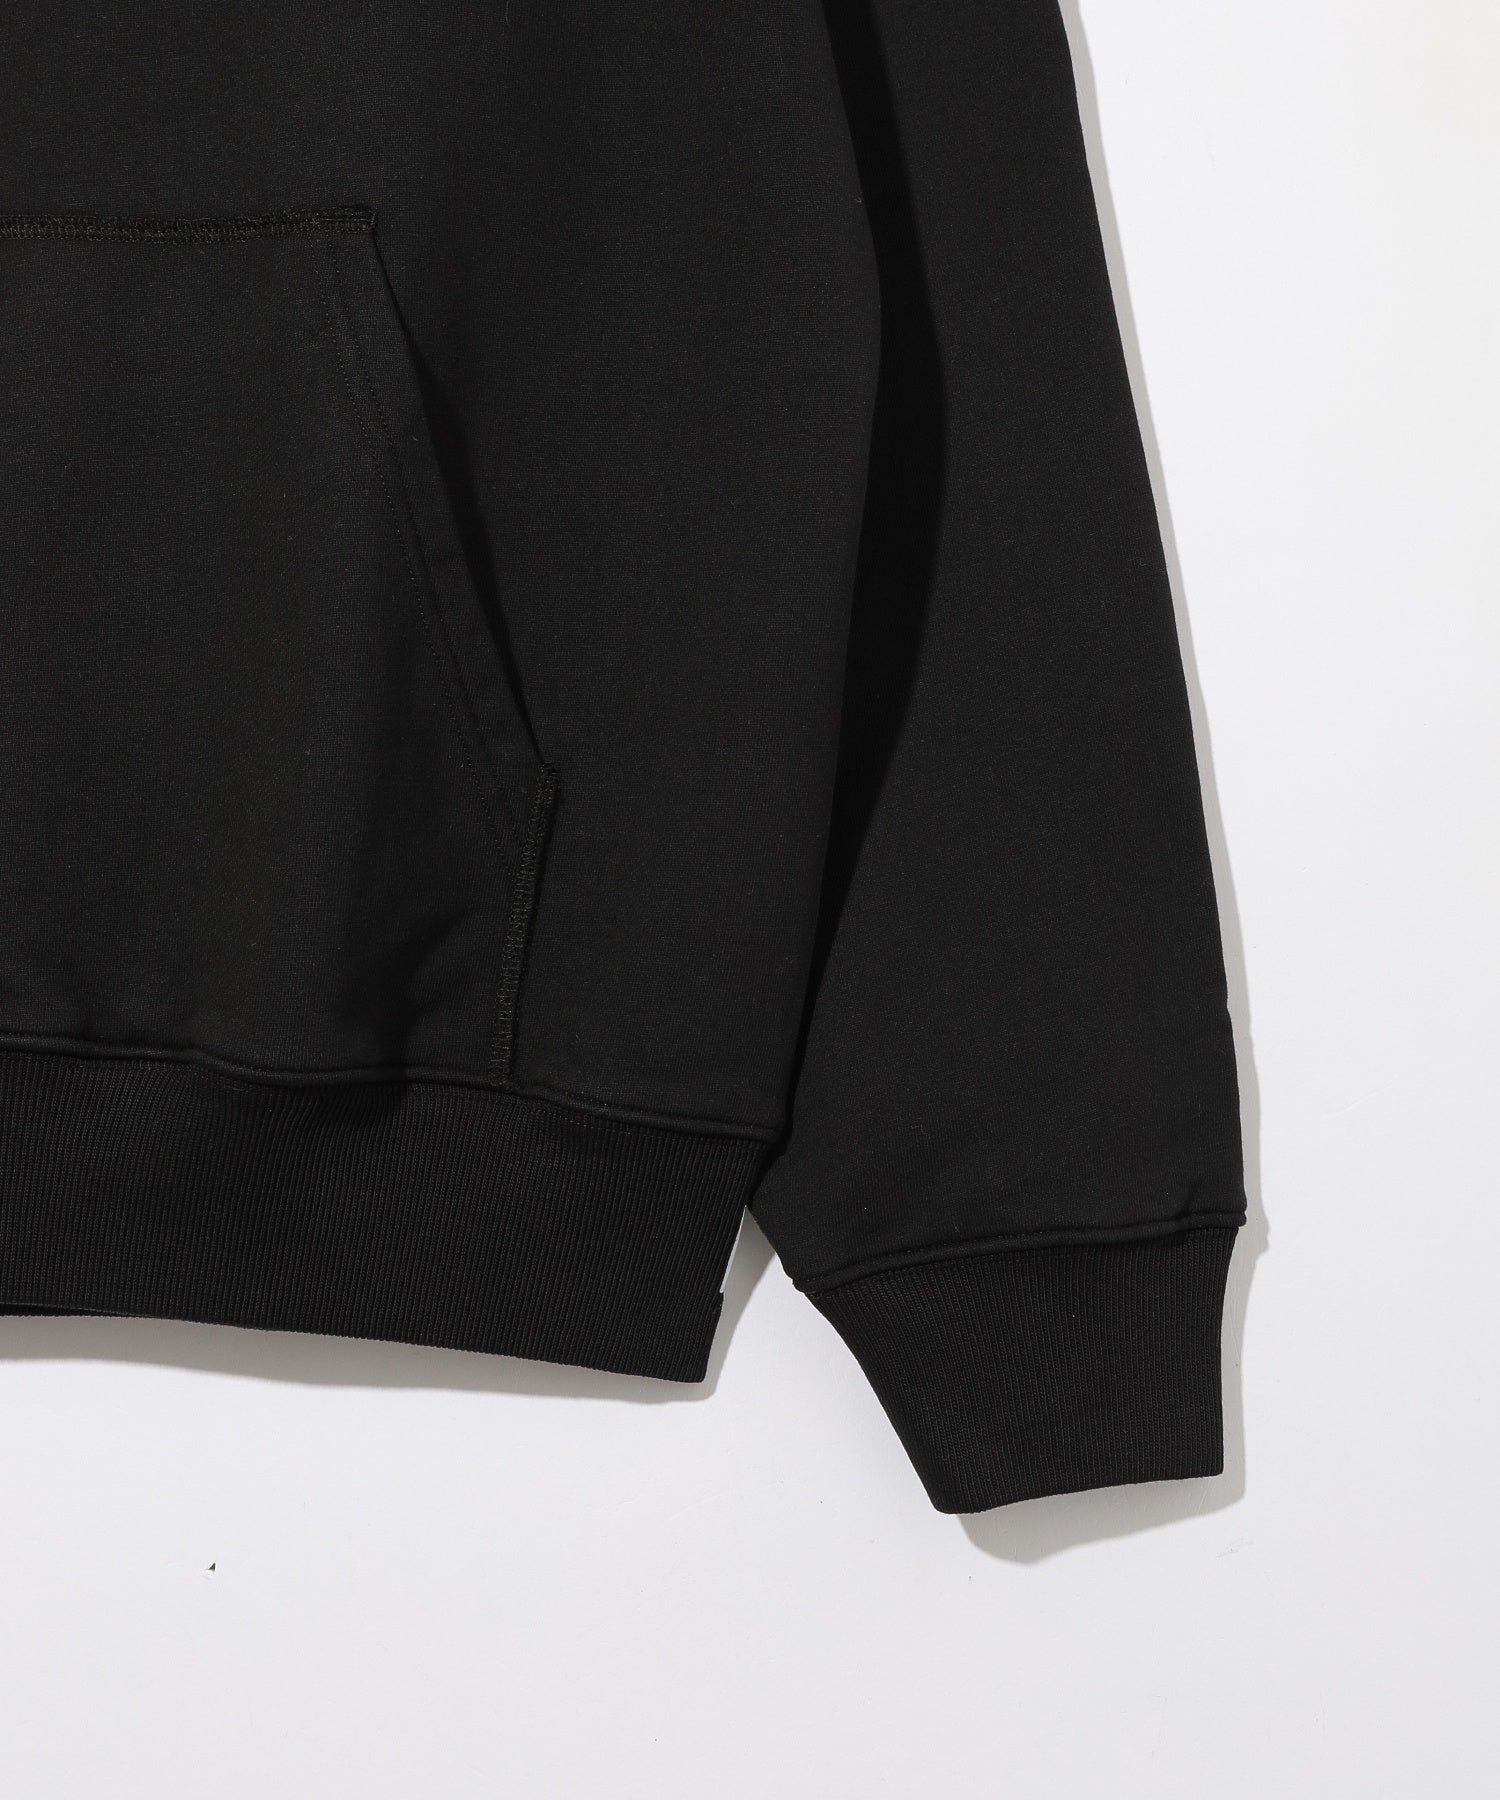 Reigning Champ/レイニングチャンプ/MIDWEIGHT TERRY RELAXED HOODIE/RC-3719